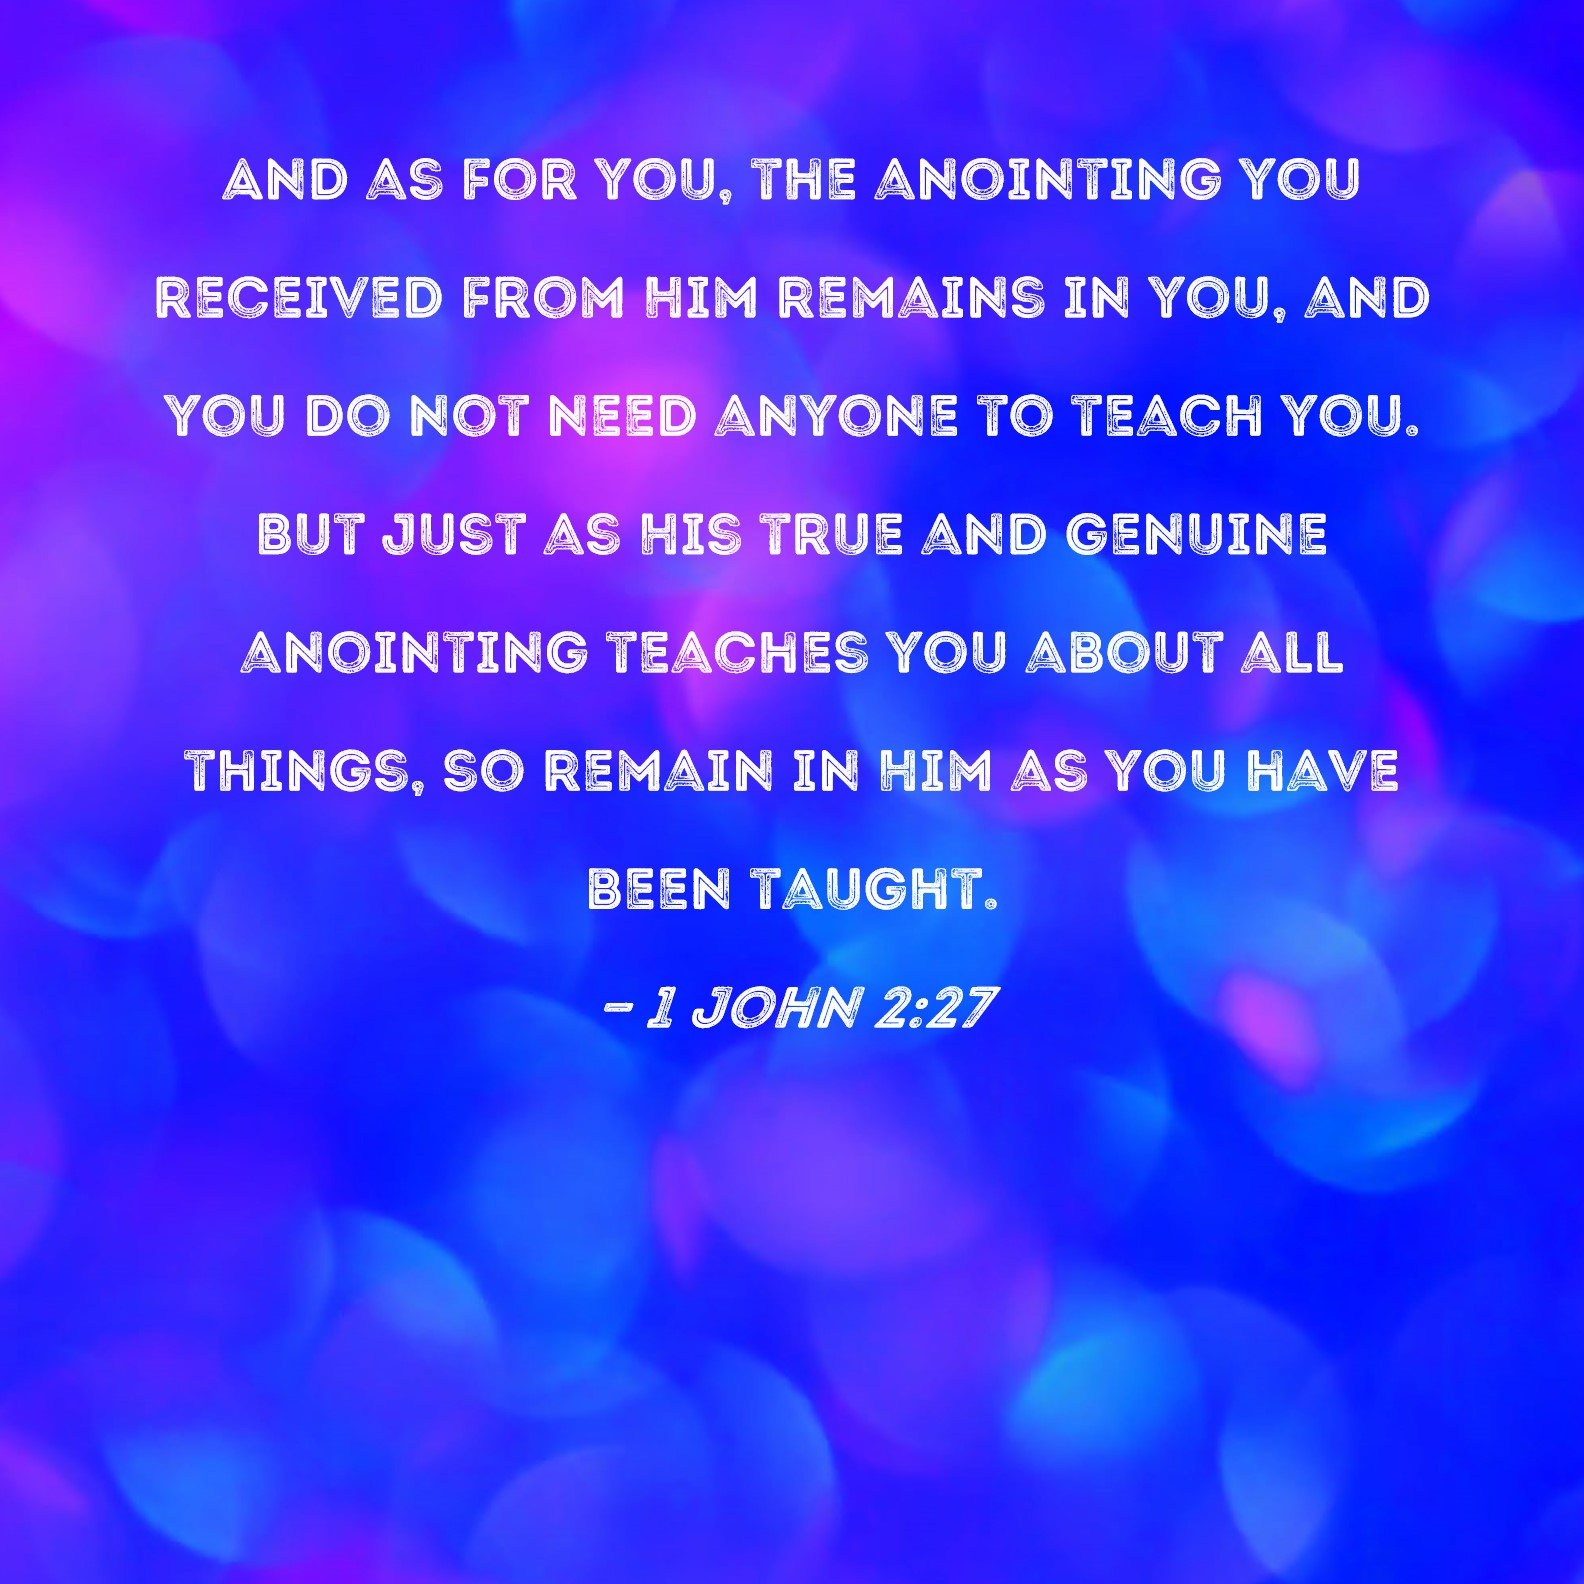 1 John 2:27 And as for you, the anointing you received from Him remains in  you, and you do not need anyone to teach you. But just as His true and  genuine